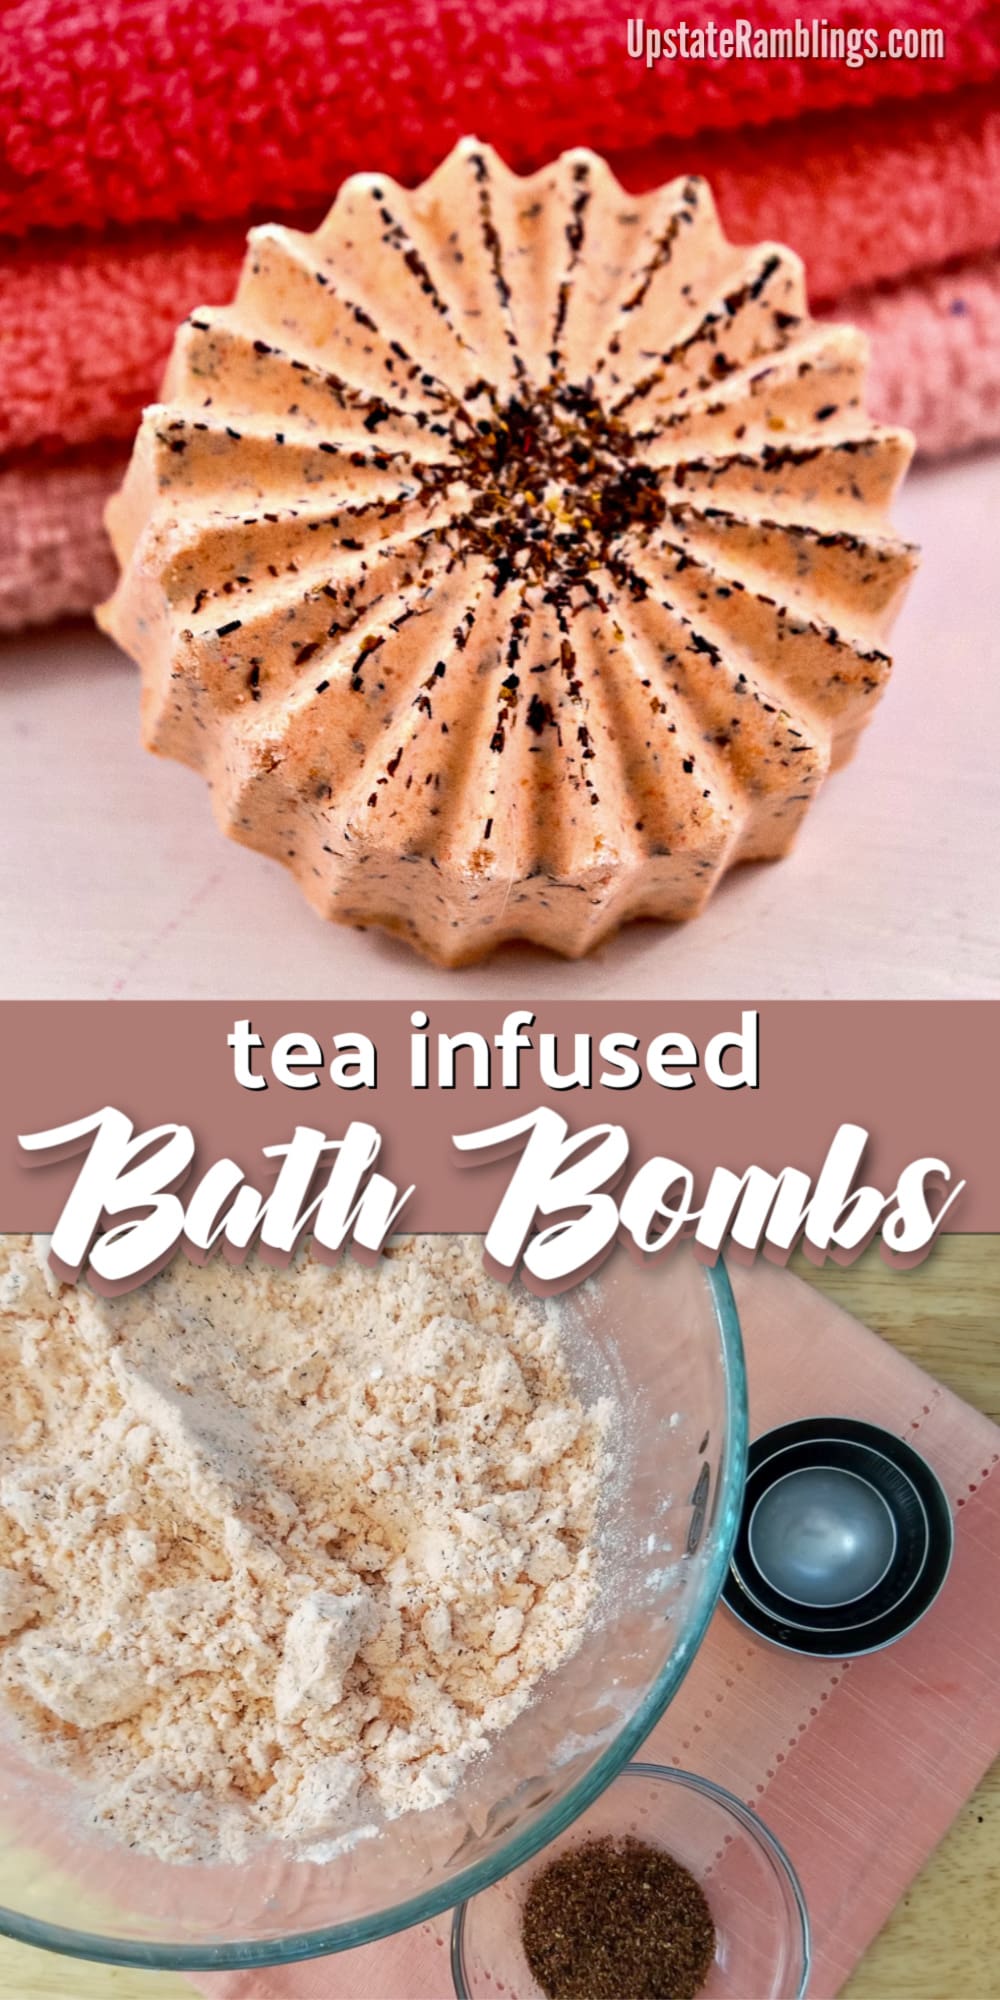 Make these easy DIY bath bombs! They make a great gift for mom or anyone who loves baths. These tea infused bath bombs include loose tea blood orange tea which adds a lovely scent and makes them perfect for relaxing and soaking in the tub. #bathbombs #DIY #teainfused